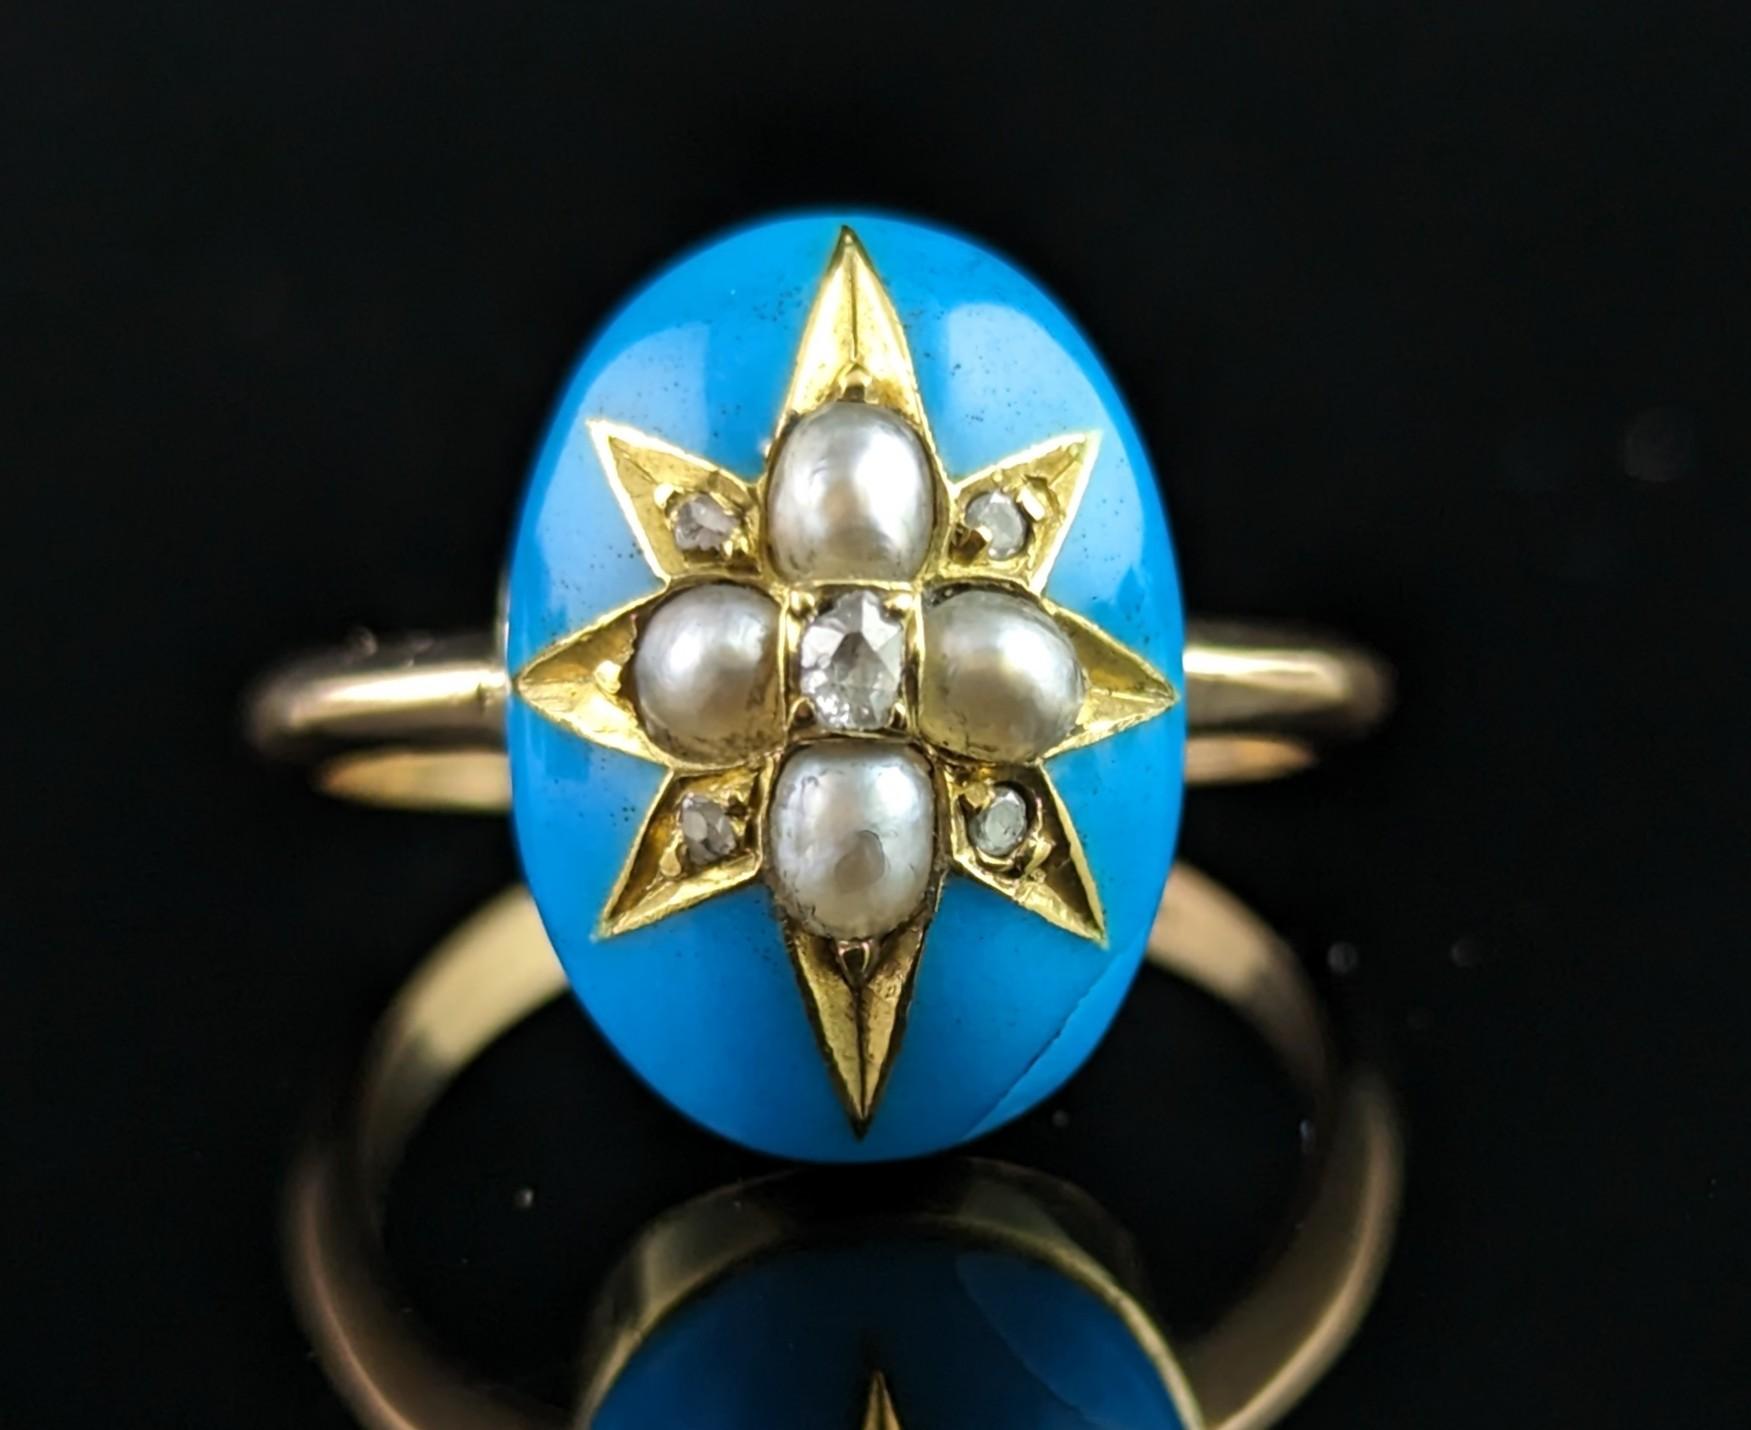 You cannot help but be enchanted by this exquisite antique Victorian star ring.

Crafted in rich 18ct gold it features a stunning duck egg blue enamel cabochon, star set with creamy split pearls and twinkling rose cut diamonds.

An iconic piece of